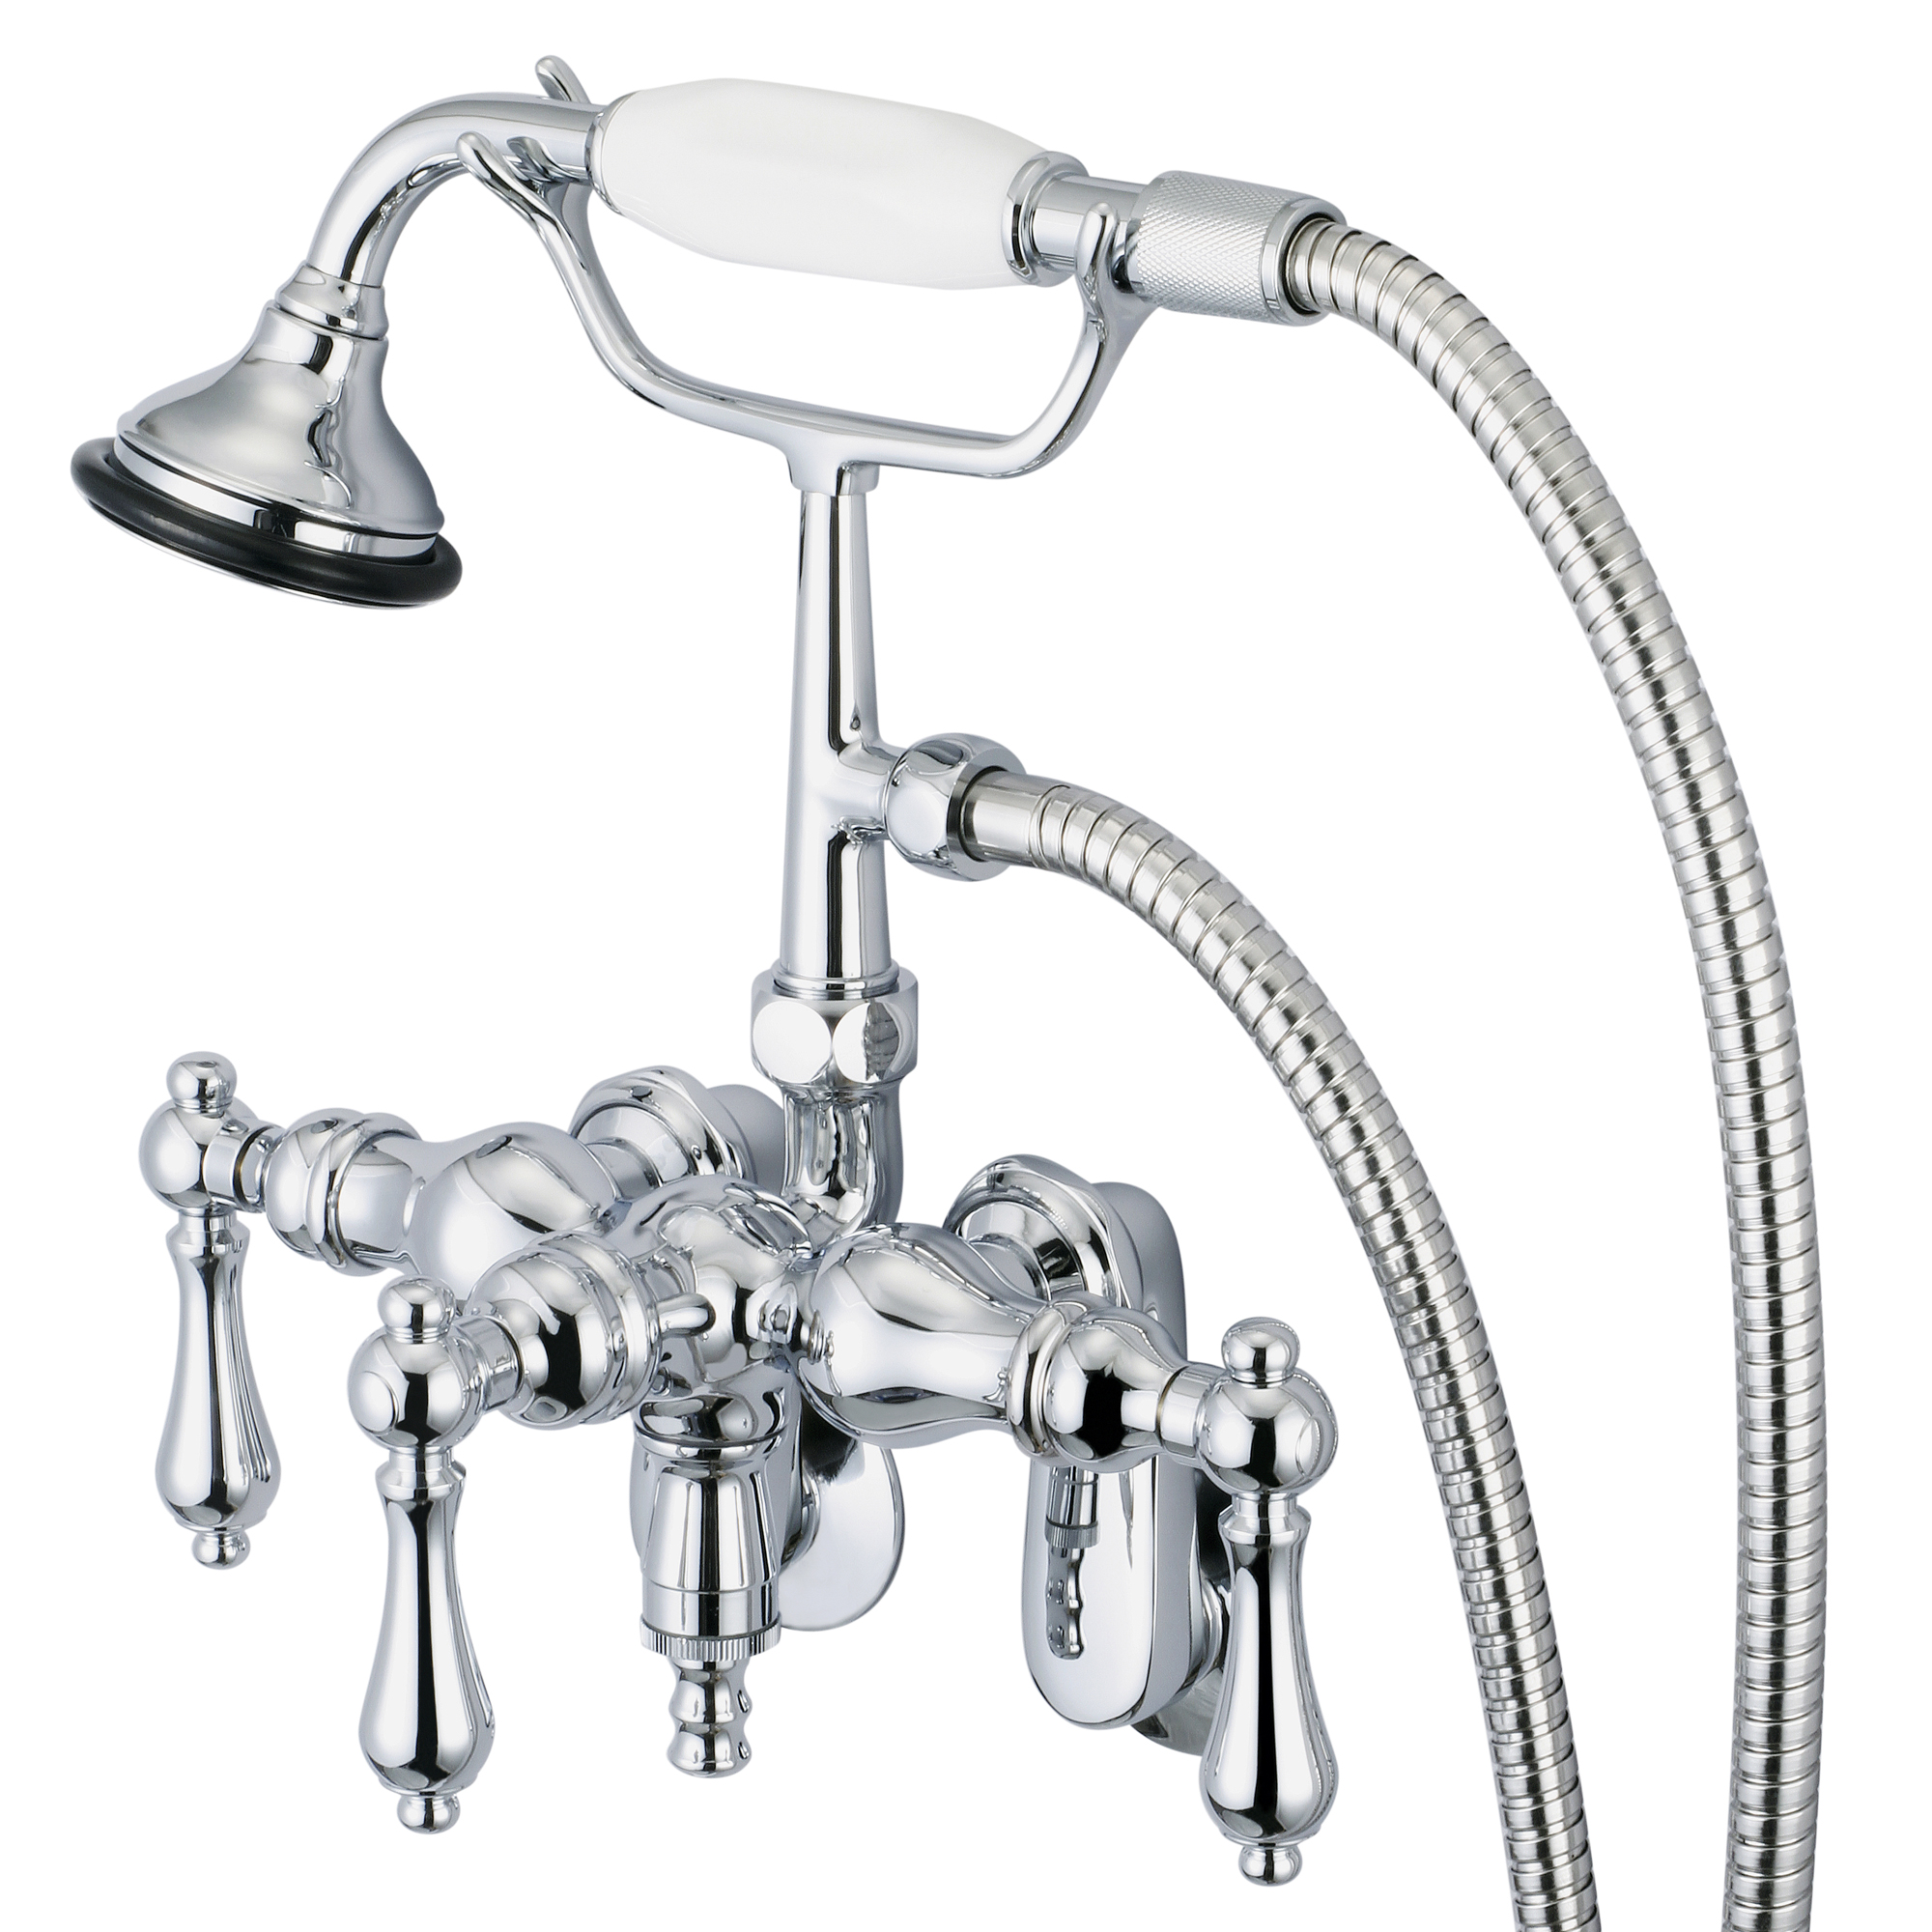 Vintage Classic Adjustable Center Wall Mount Tub Faucet With Down Spout, Swivel Wall Connector & Handheld Shower in Chrome Finish With Metal Lever Handles Without Labels